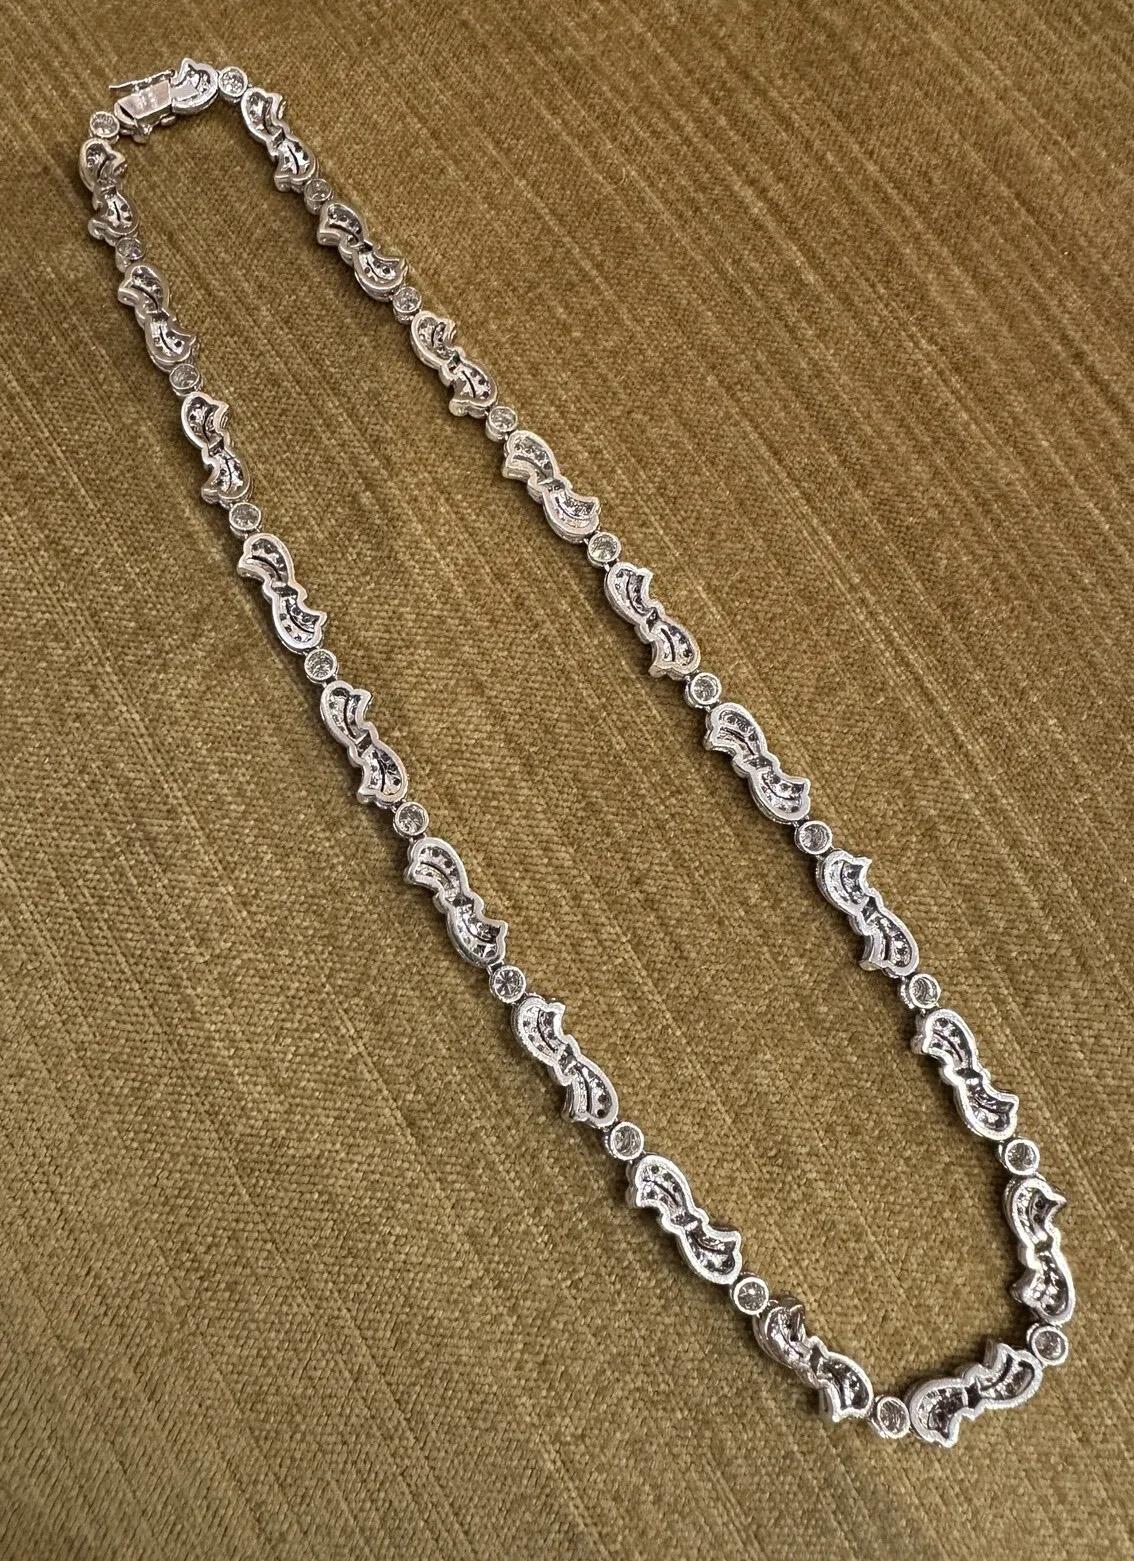 Diamond Ribbon Motif Choker Necklace 10.00 Carats Total Weight in 18k White Gold In Excellent Condition For Sale In La Jolla, CA